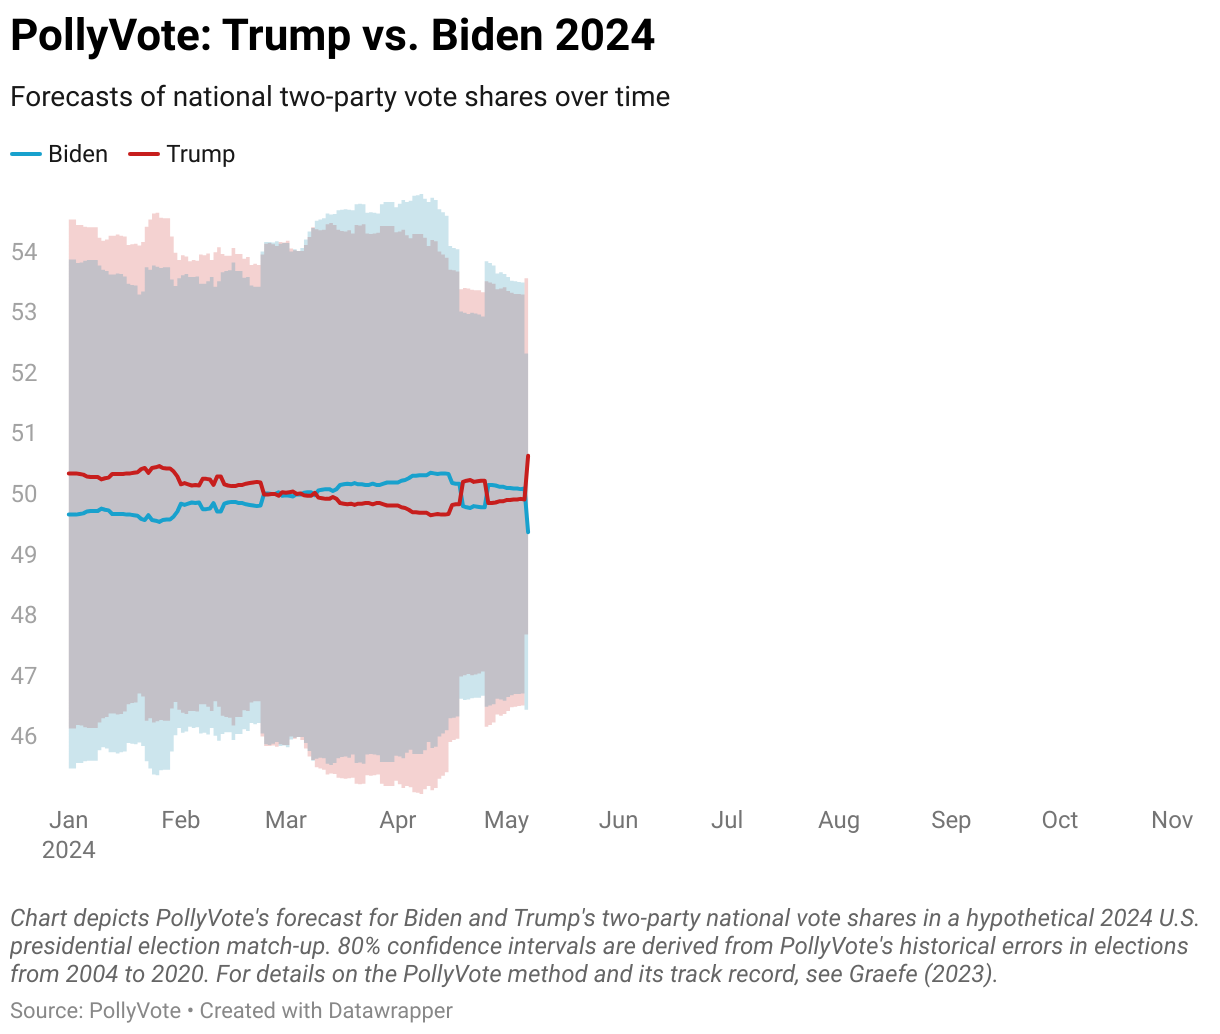 Chart depicts PollyVote's forecast for Biden and Trump's two-party national vote shares. 80% confidence intervals are derived from PollyVote's historical errors in elections from 2004 to 2020. For details on the PollyVote method and its track record, see Graefe (2023).